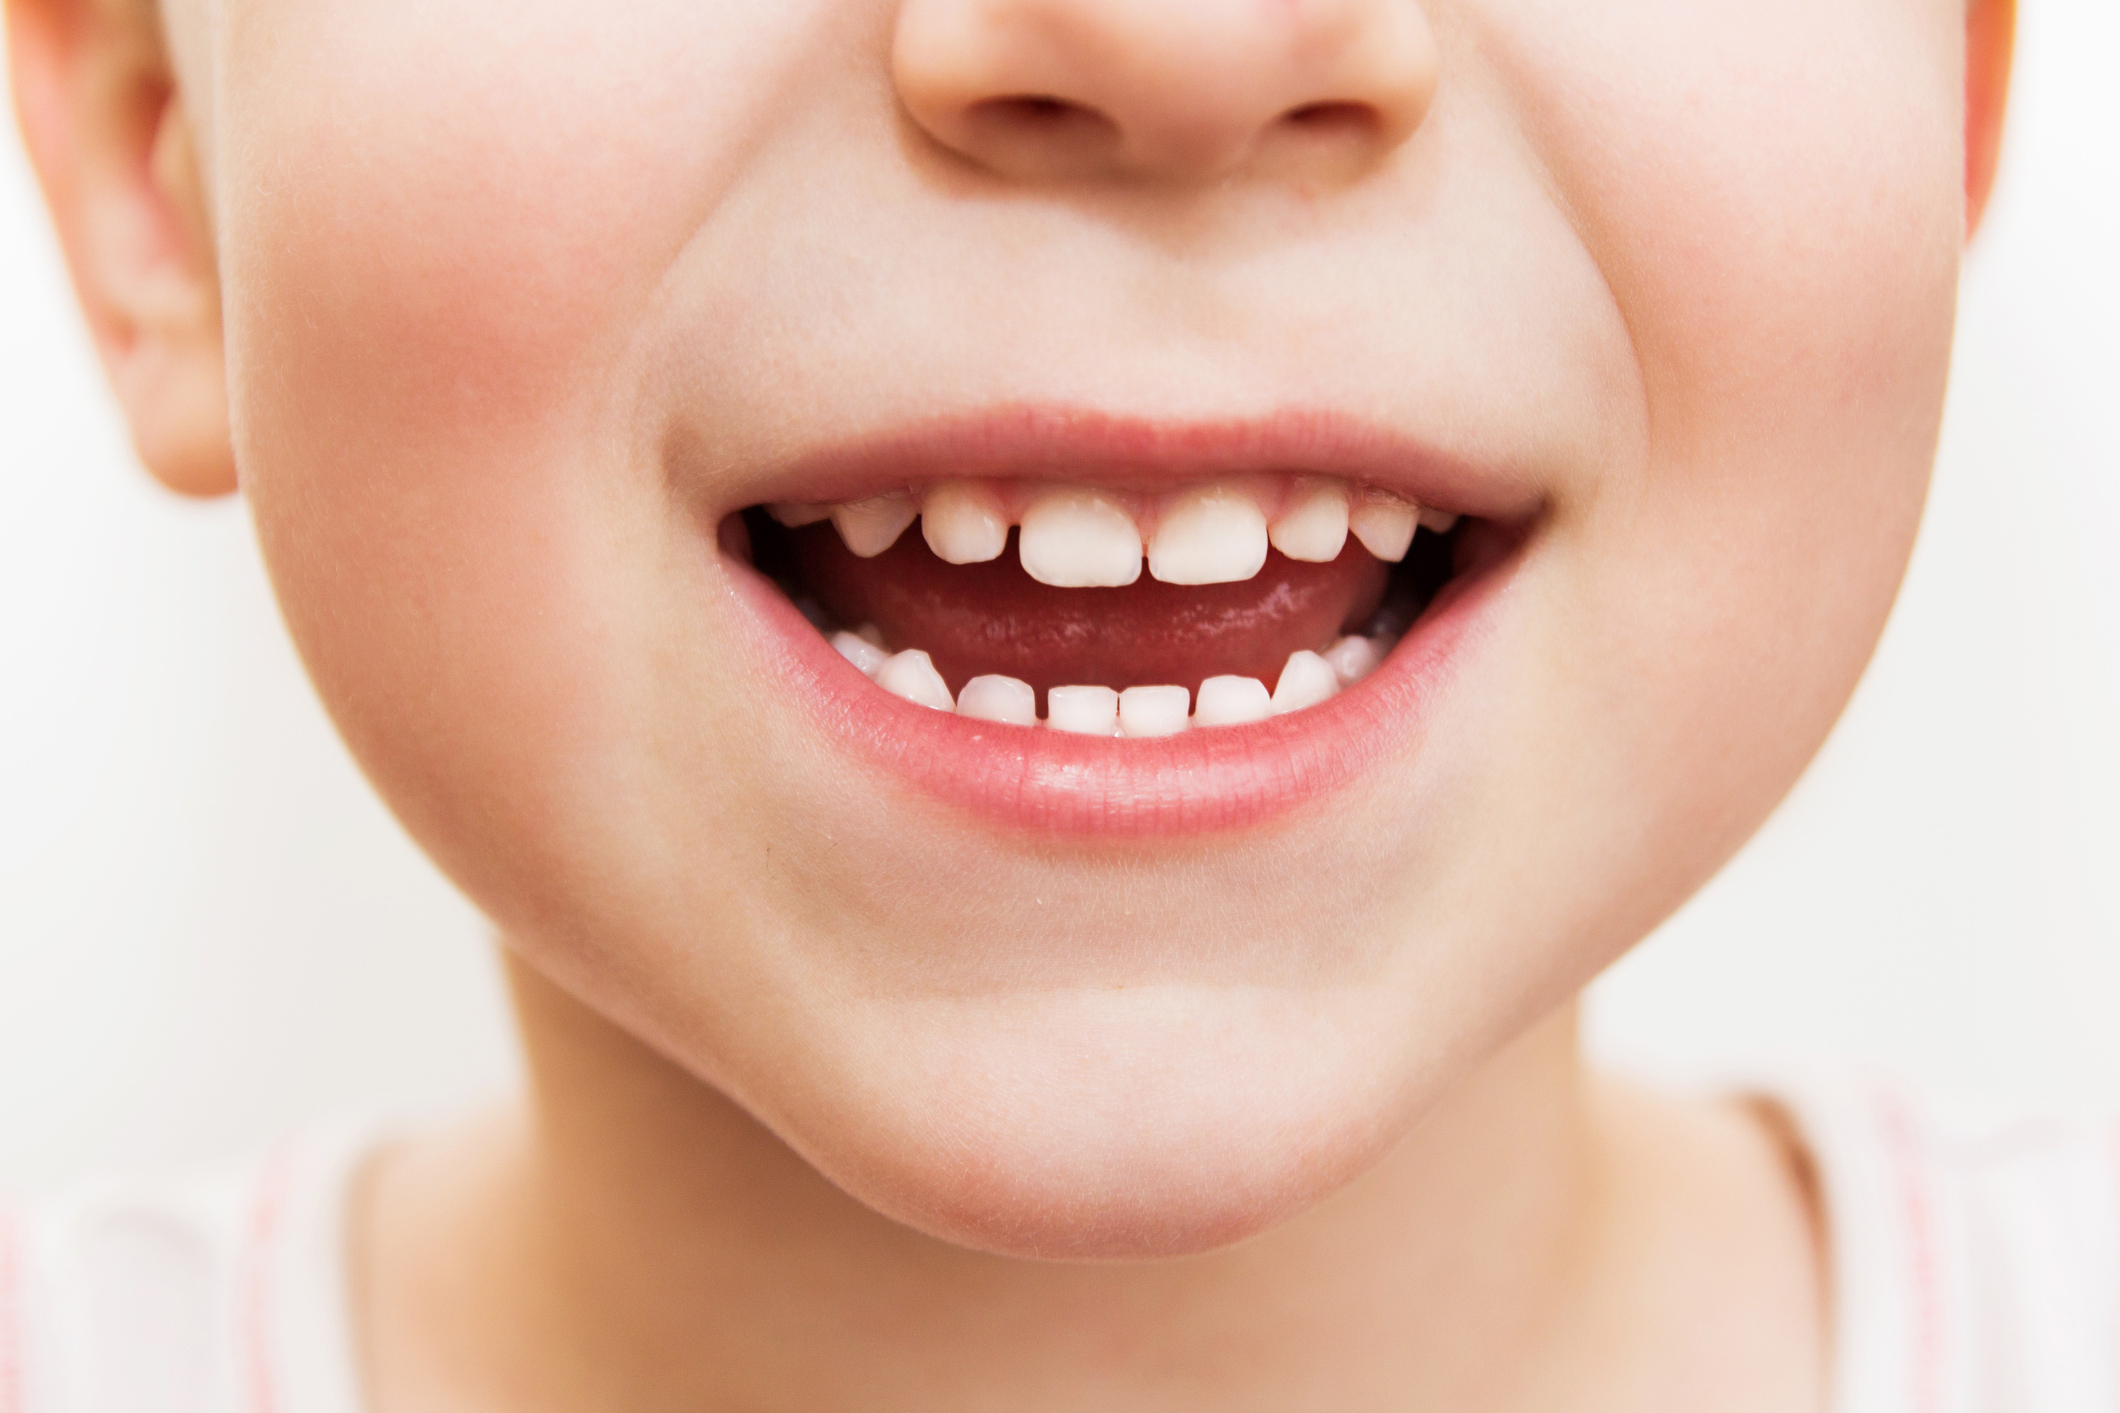 Children under 6 are most at risk of swallowing toothpaste when brushing their teeth